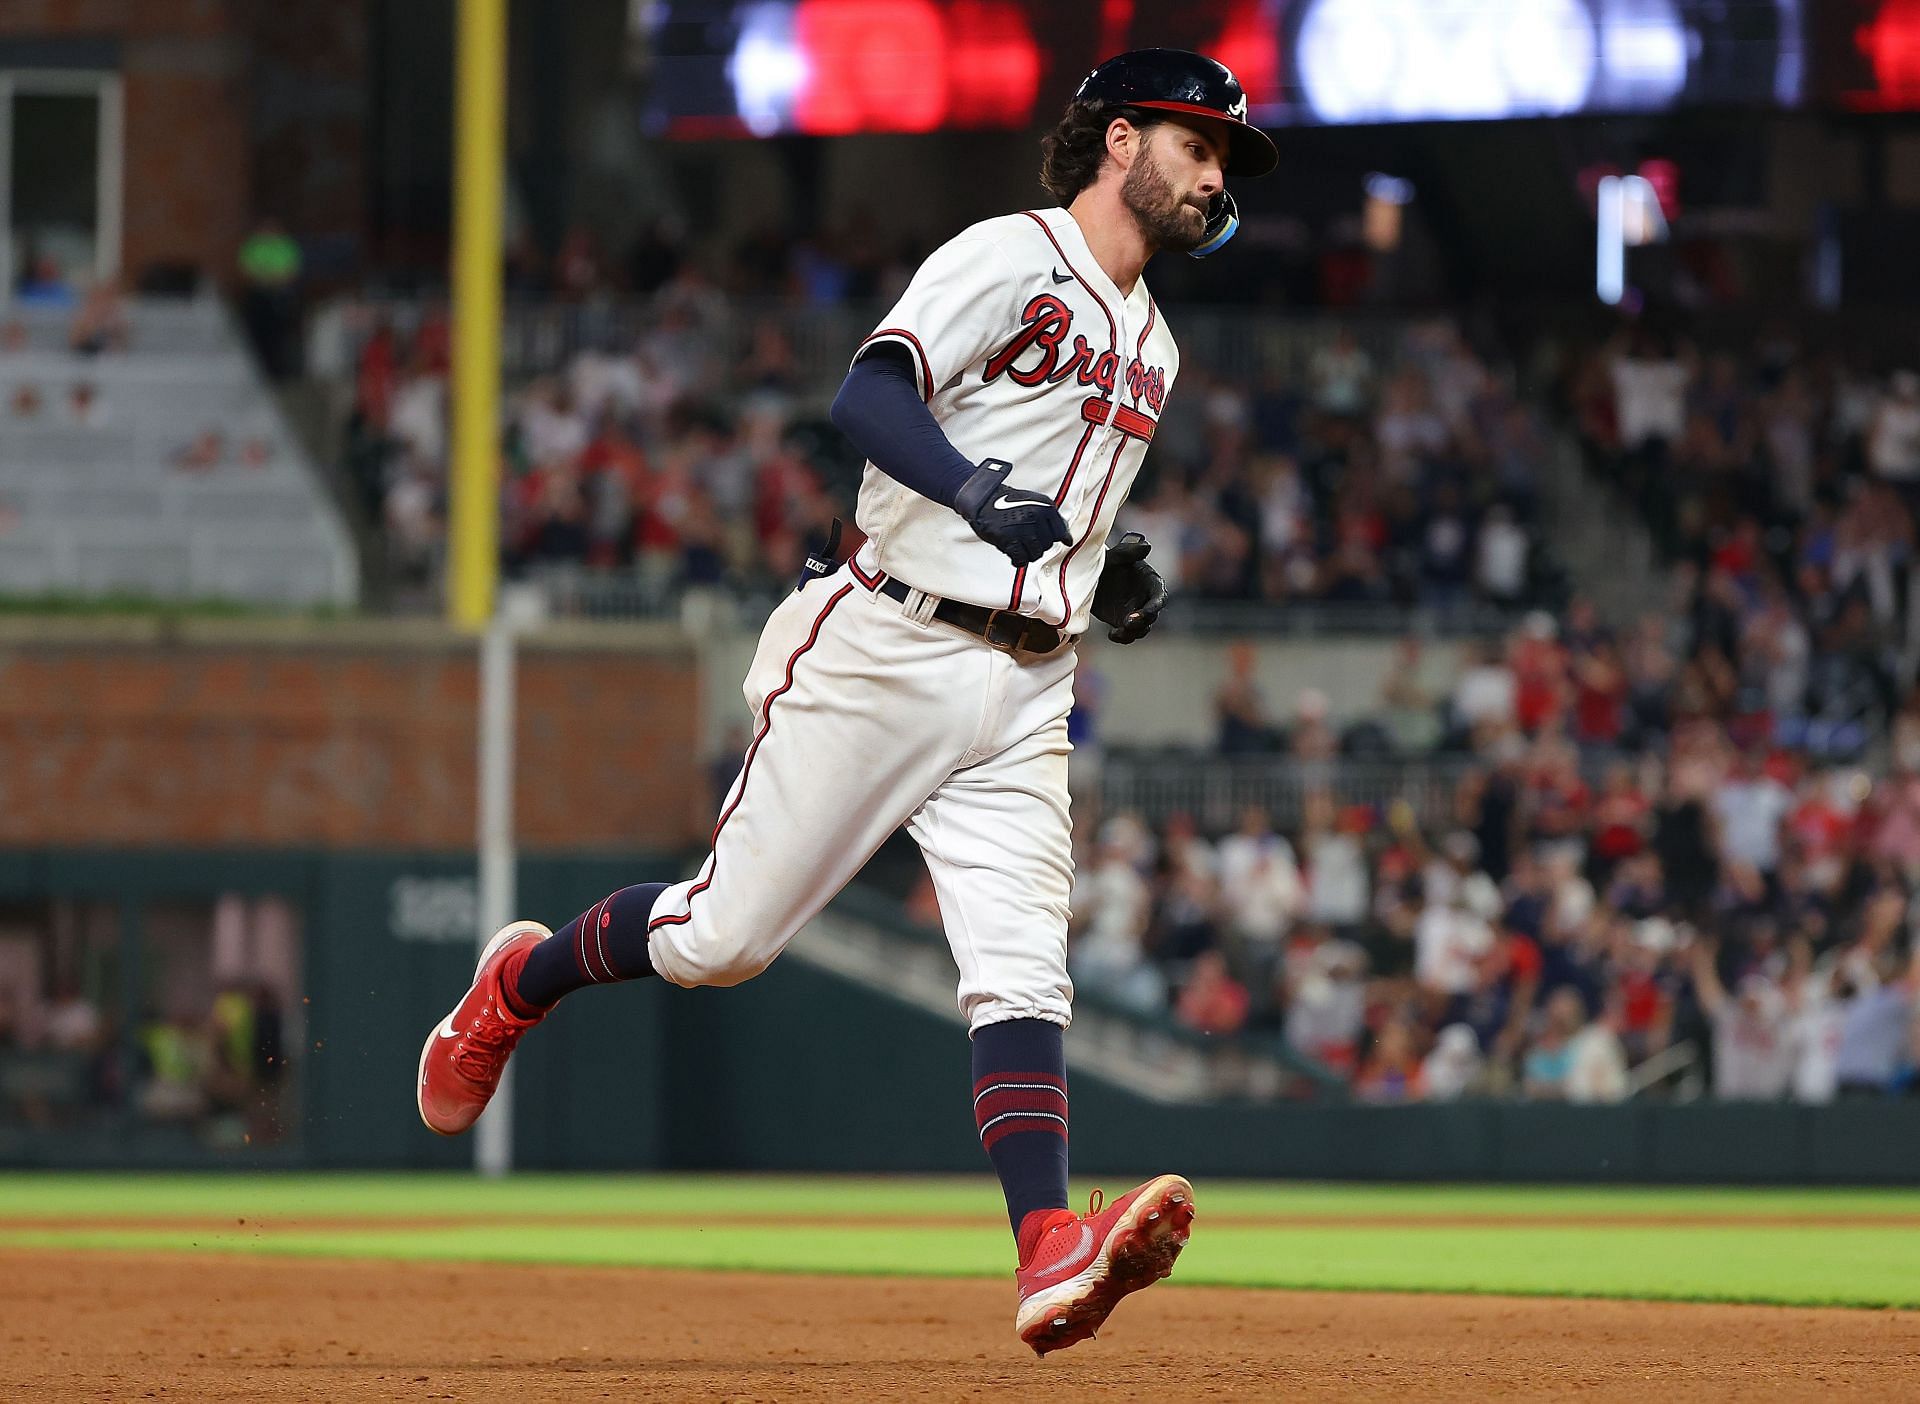 Dansby Swanson promoted to the Atlanta Braves